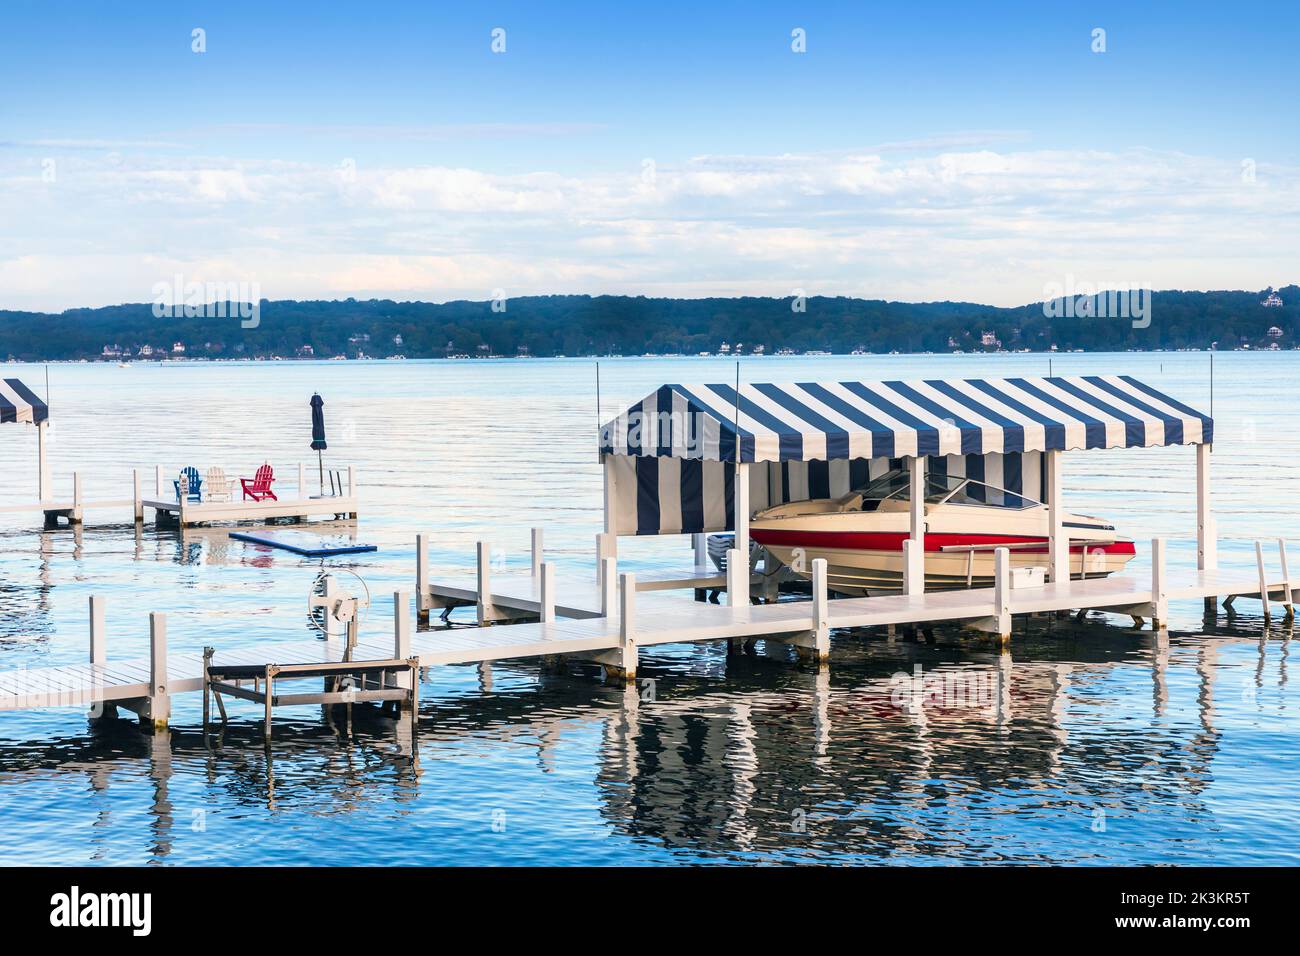 Small wooden pier with private boat, early morning at Lake Geneva, Wisconsin, America. Stock Photo